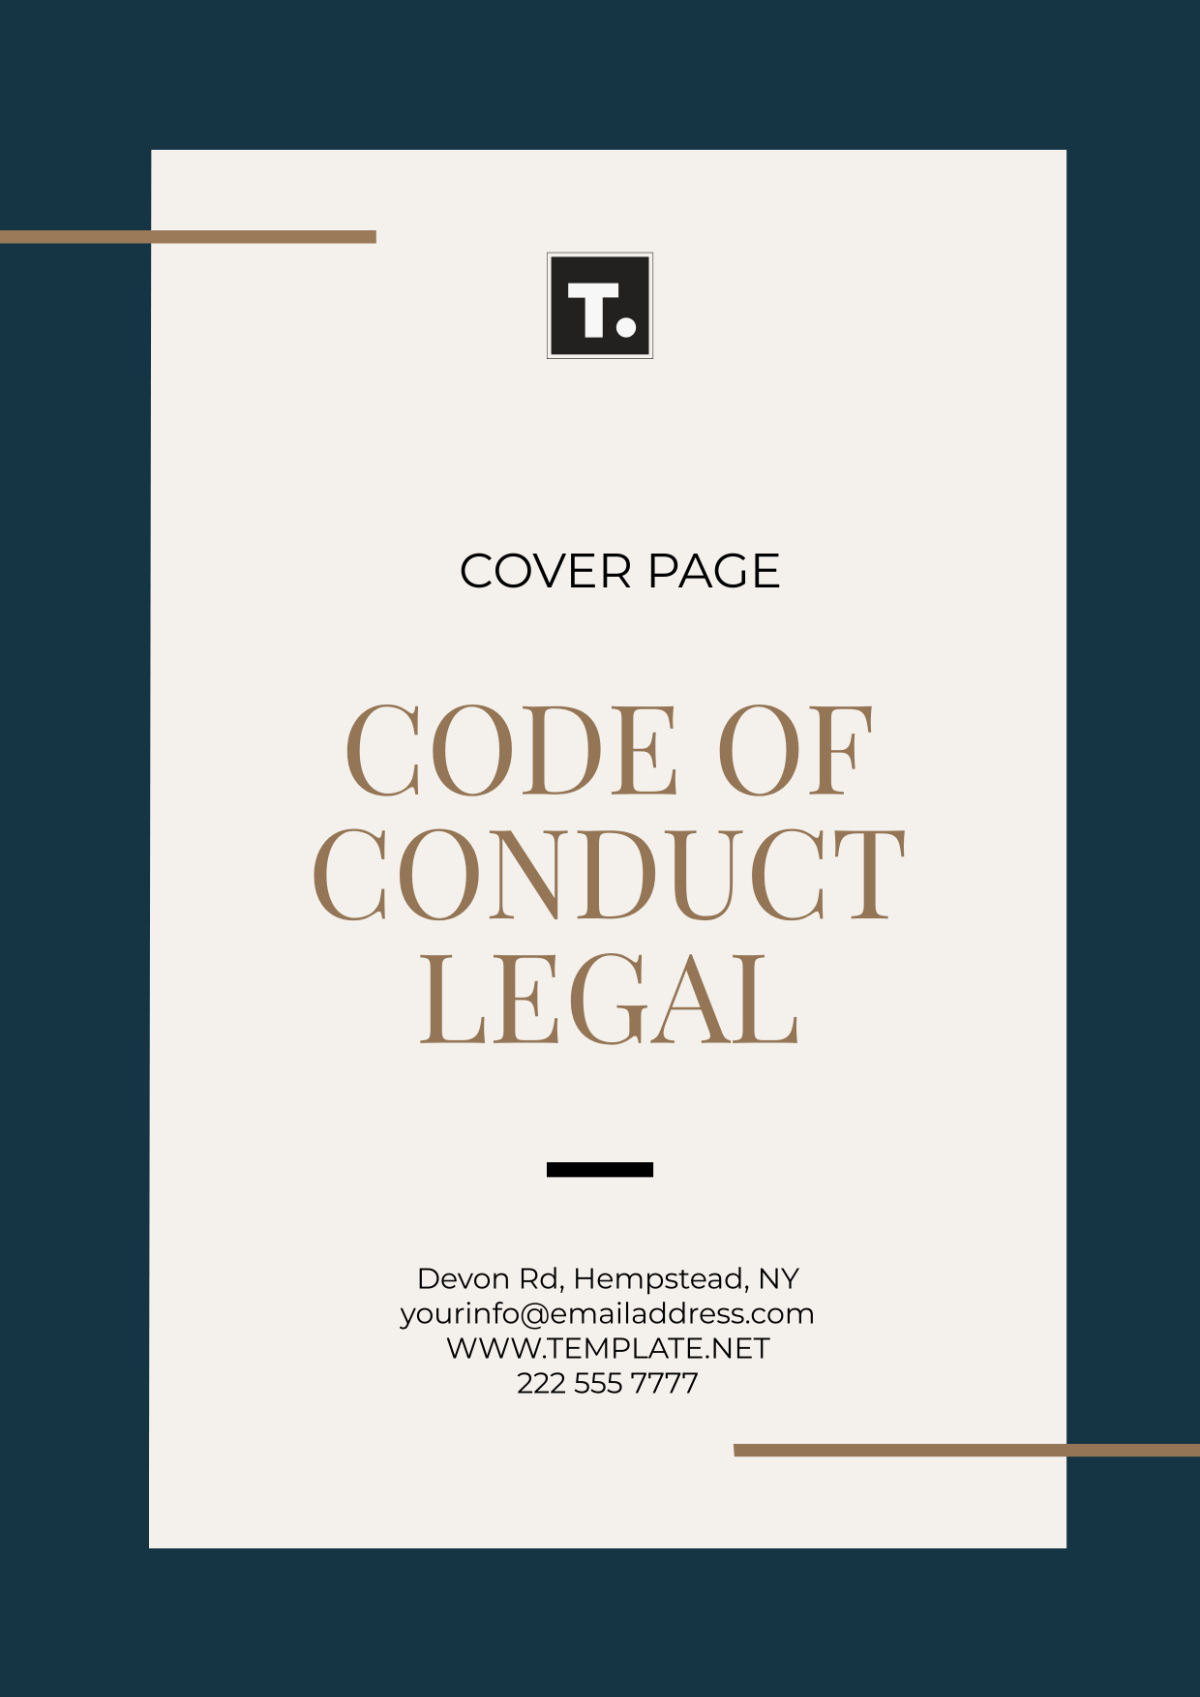 Code of Conduct Legal Cover Page